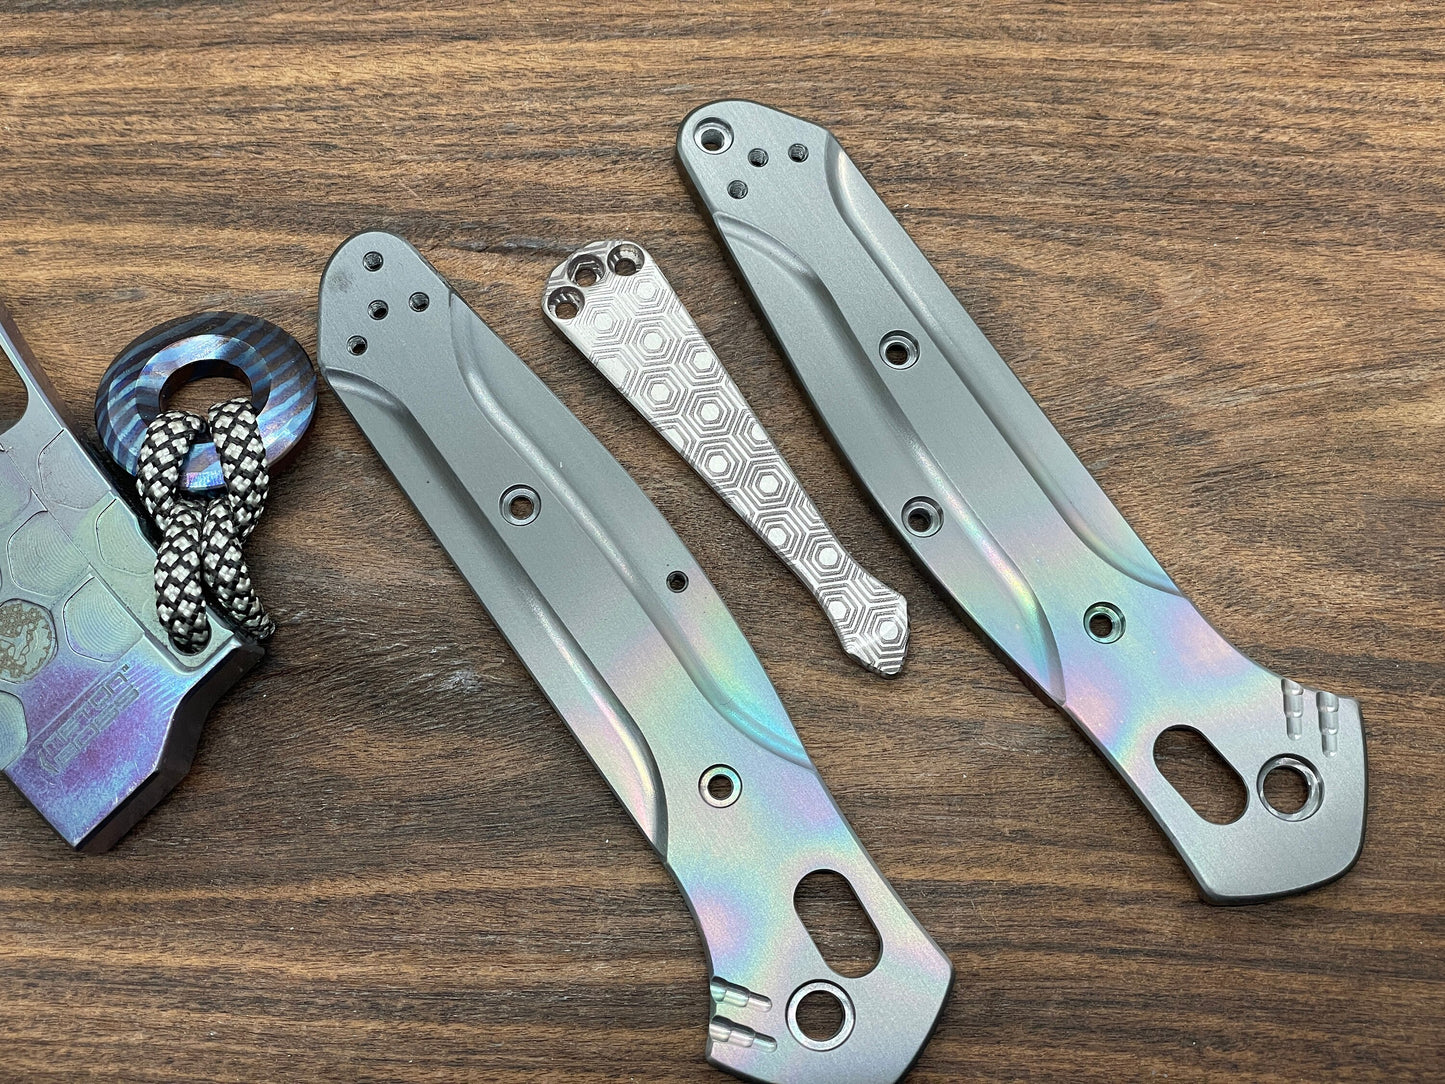 HONEYCOMB engraved SPIDY Titanium CLIP for most Benchmade models